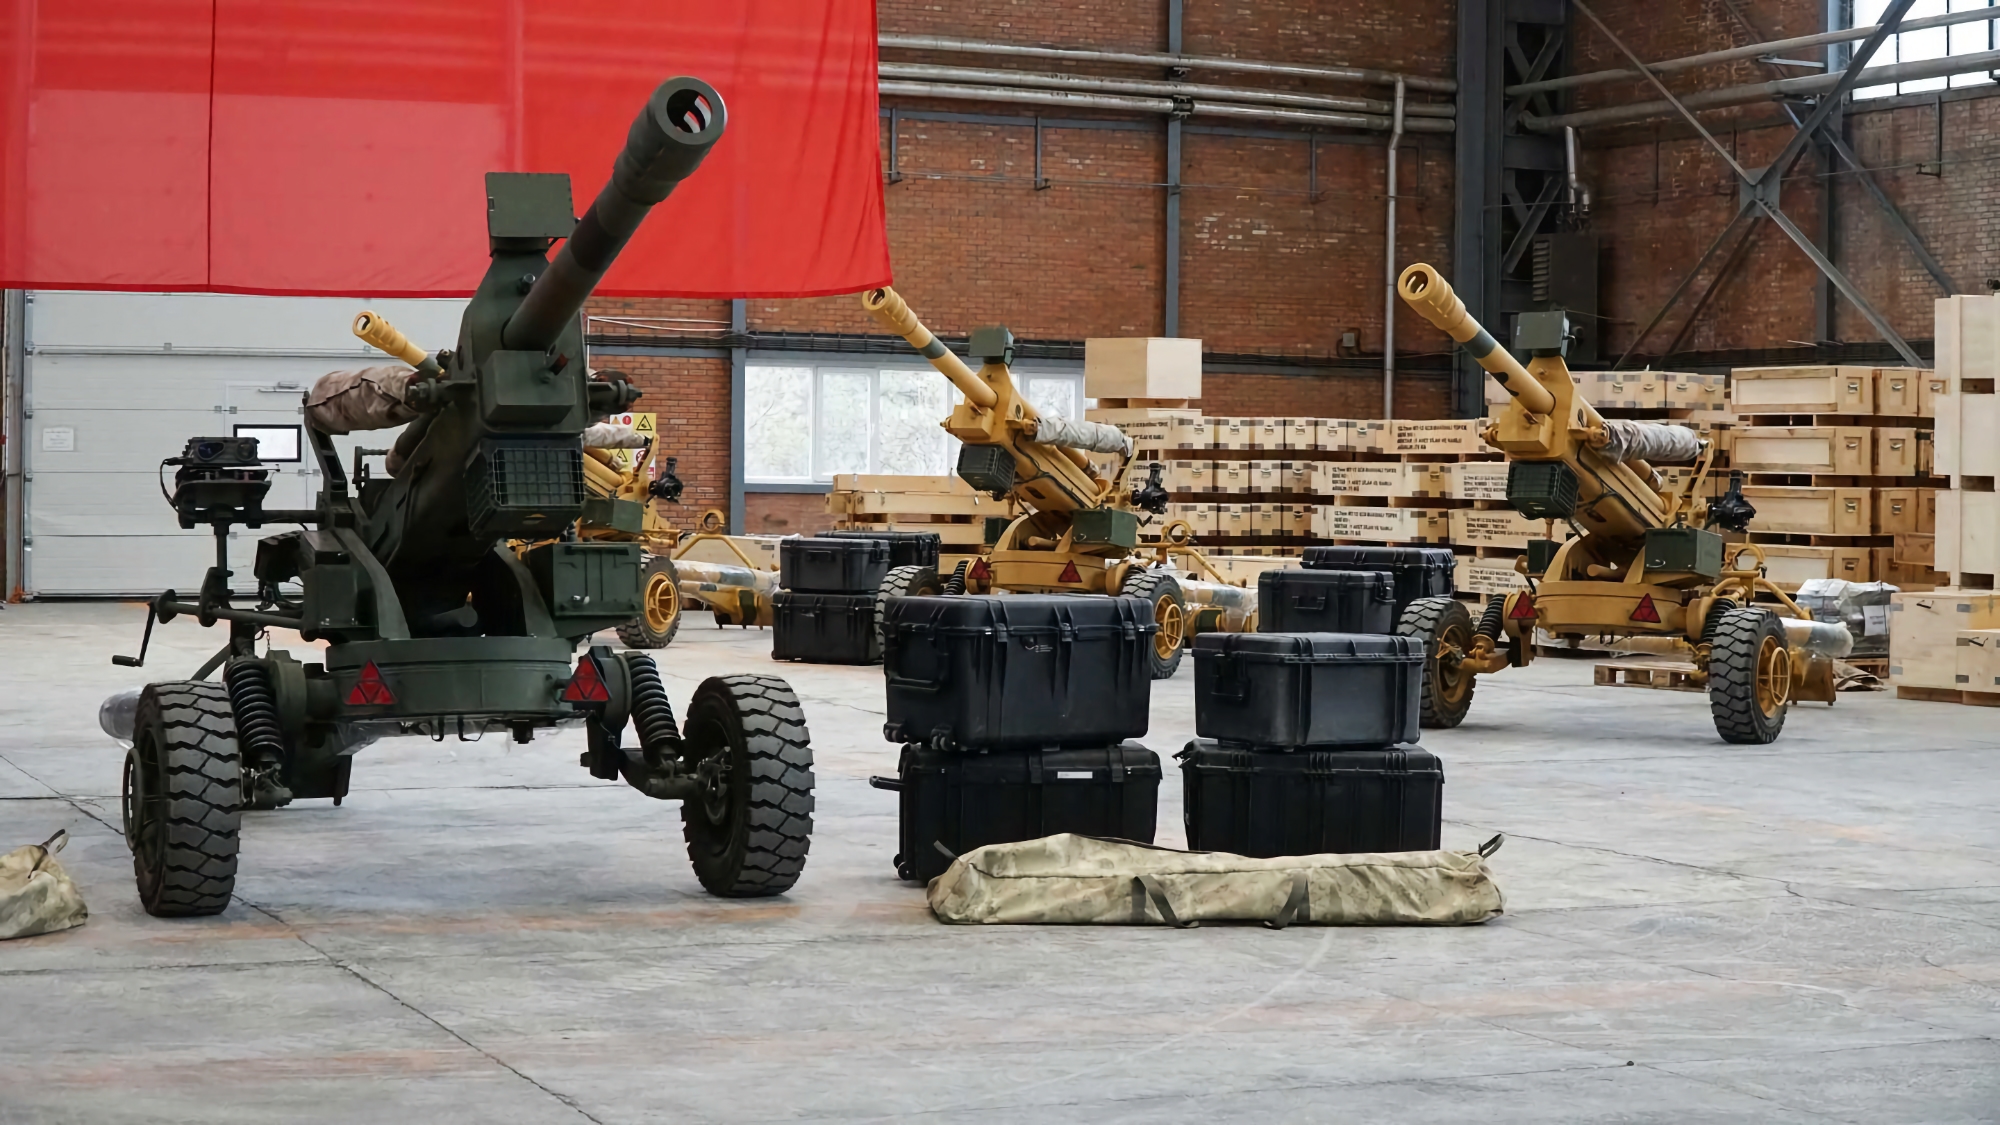 Turkish army received the first batch of 105mm BORAN howitzers, they are deployed in 1 minute and can fire up to 17 km